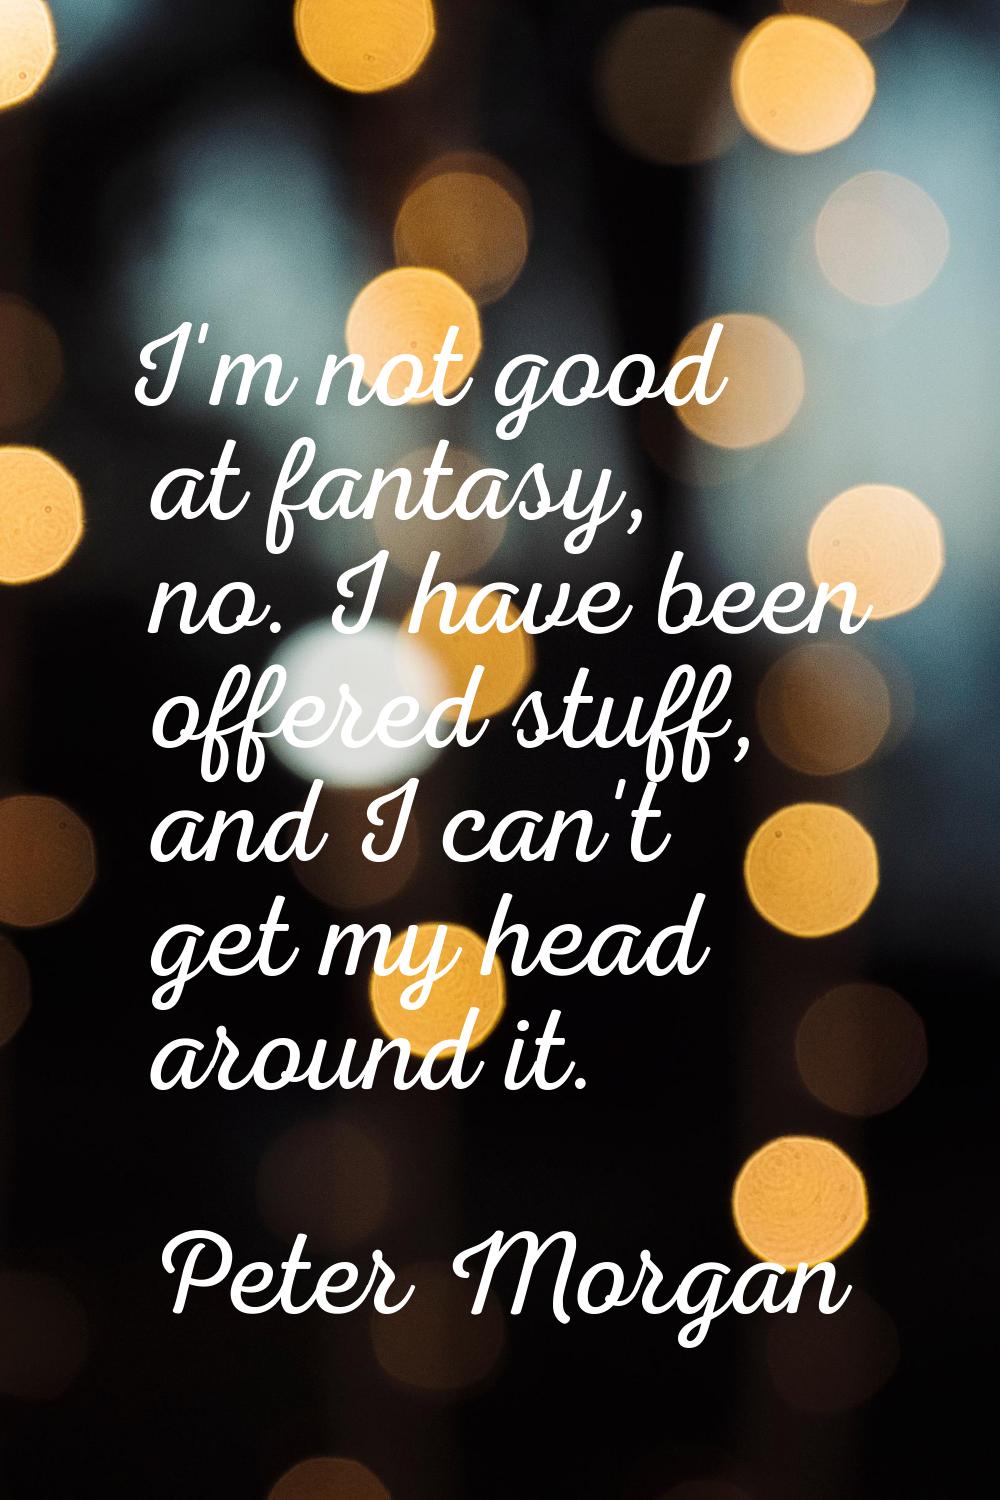 I'm not good at fantasy, no. I have been offered stuff, and I can't get my head around it.